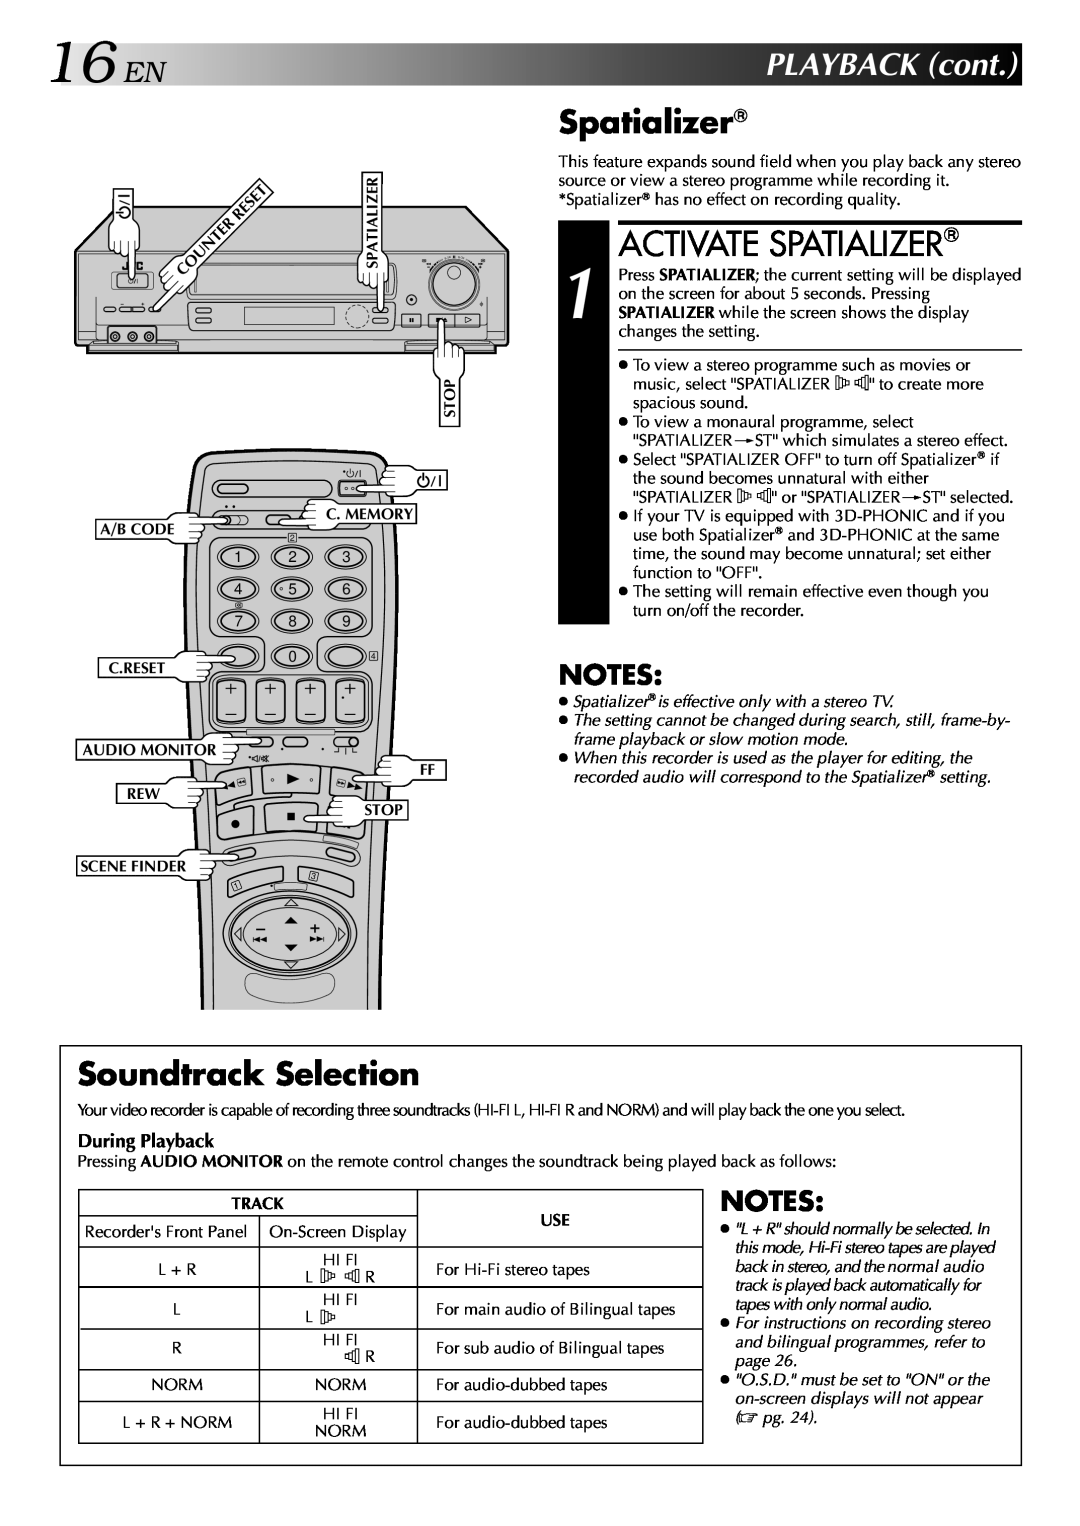 JVC HR-DD848E specifications 16EN, Activate Spatializer, Soundtrack Selection, PLAYBACK cont, During Playback, Track 